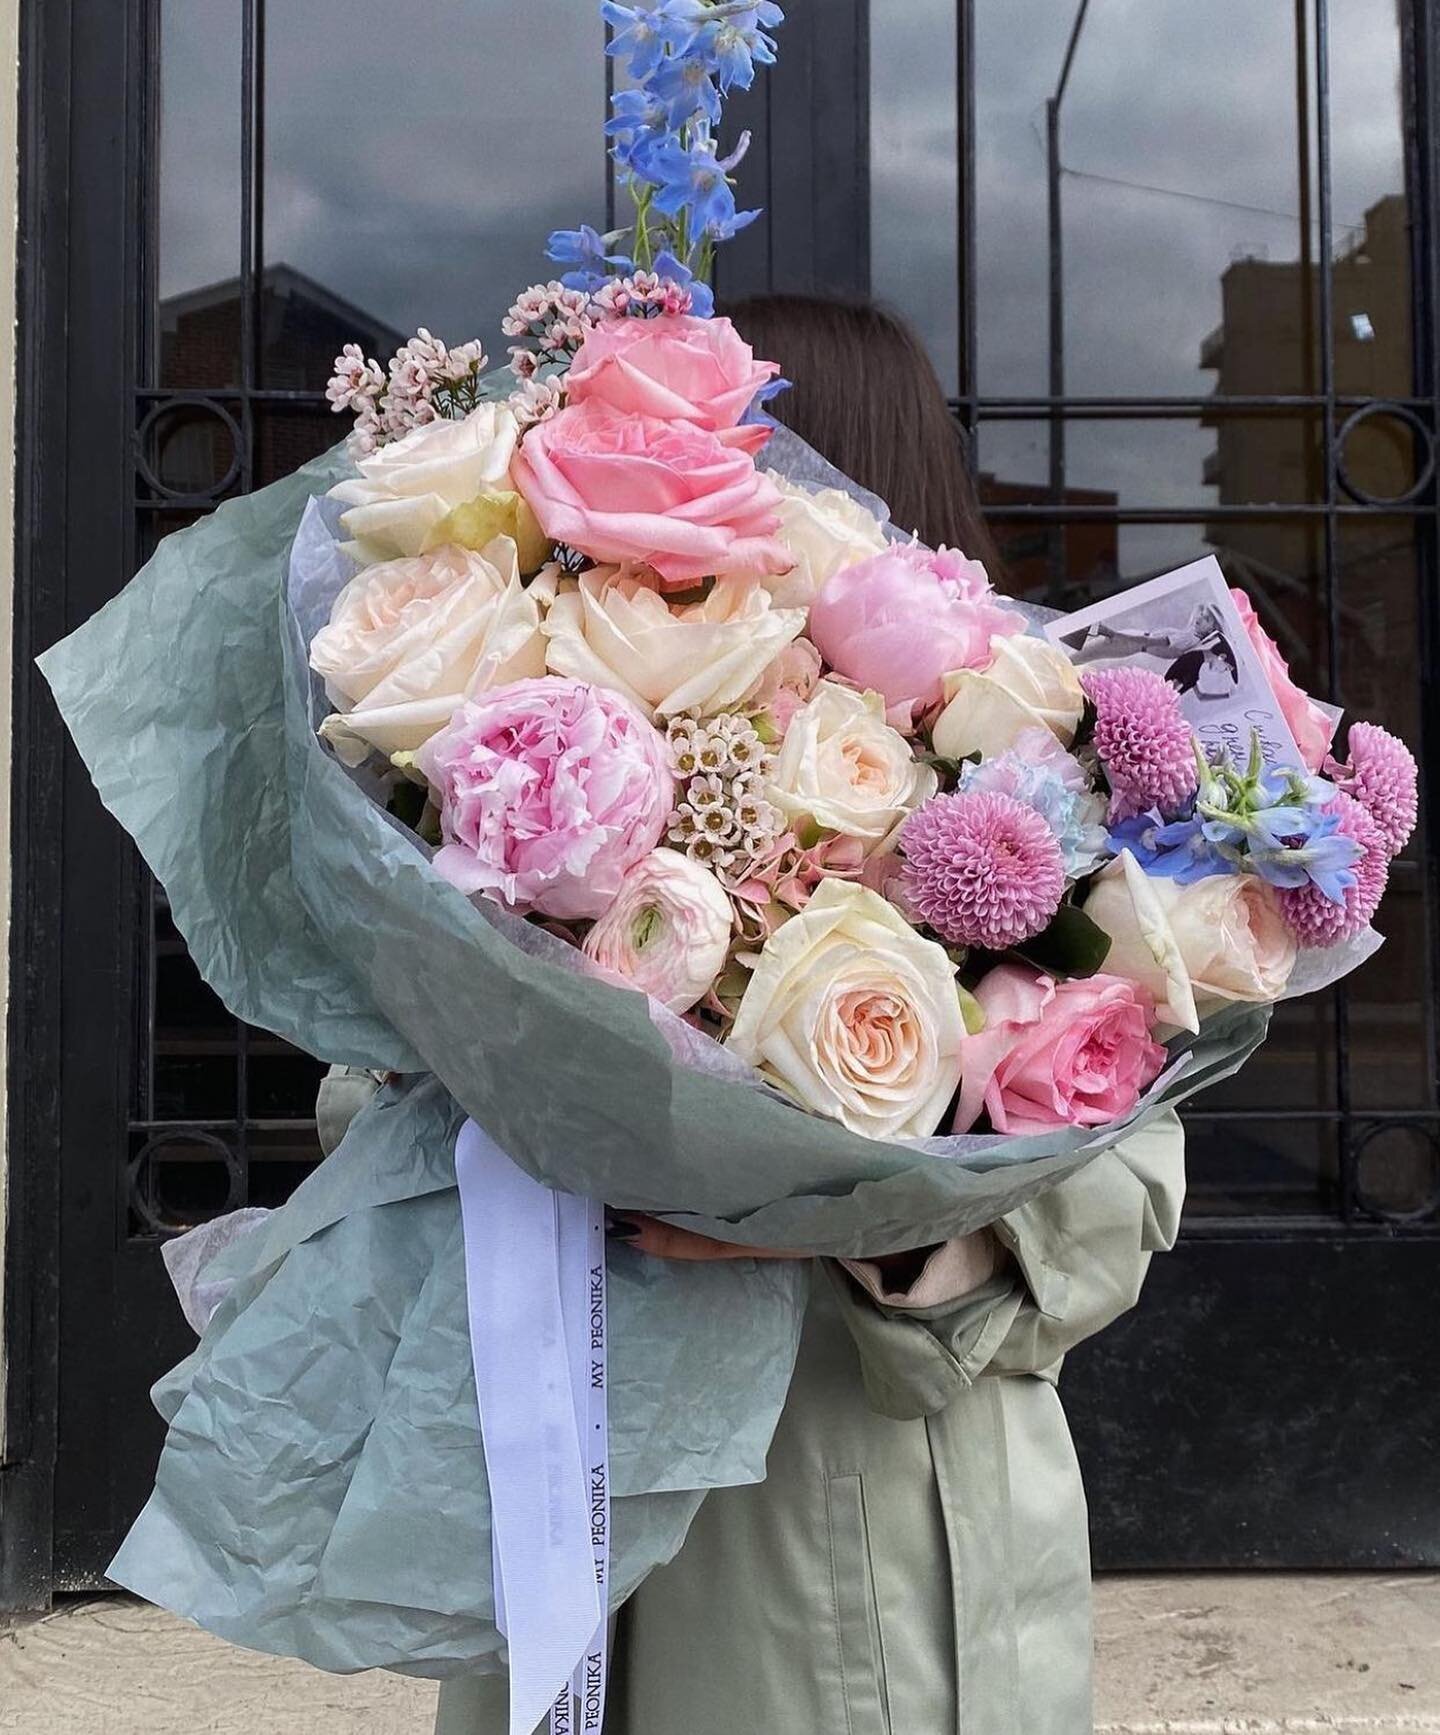 Valentine&rsquo;s Day is right around the corner. A few years ago, flowers may have been the easy solution to not knowing what to get someone. However, with the love of aesthetic and know your special someone&rsquo;s style&hellip;it can actually be v